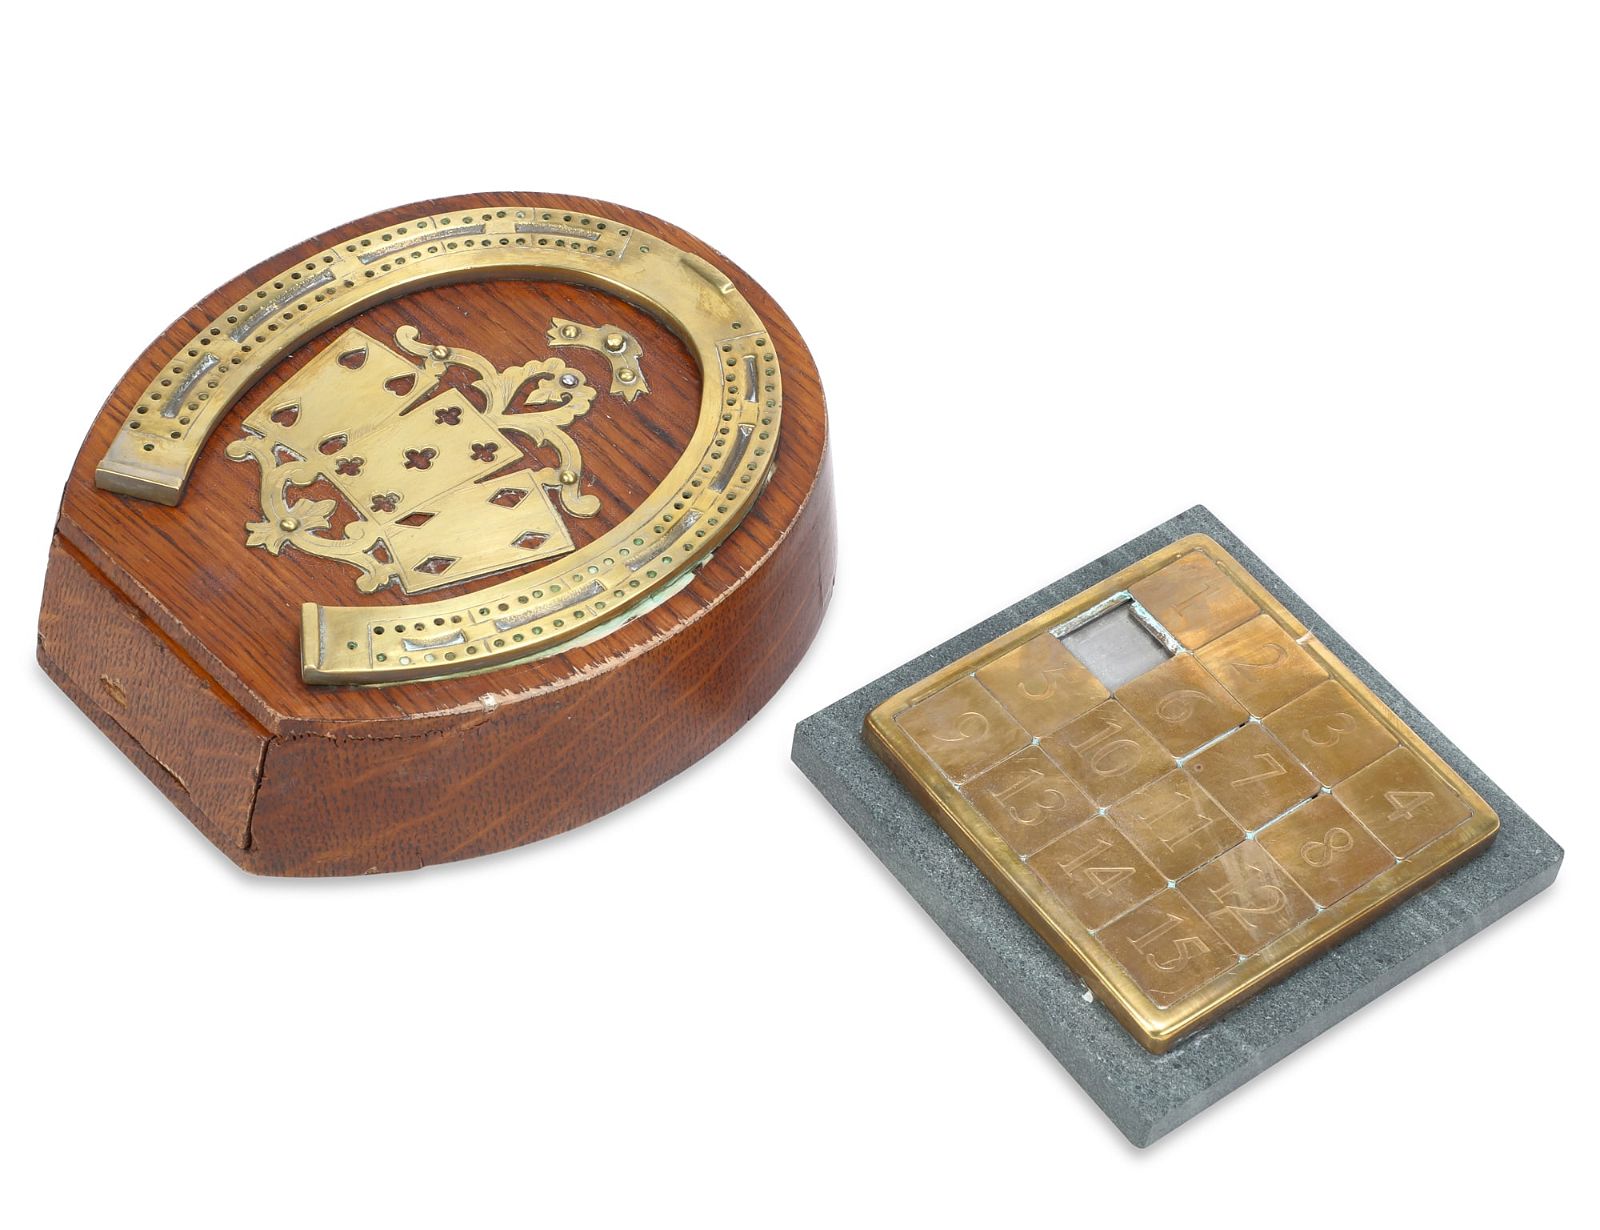 TWO BRASS AND WOOD GAME BOARDSTwo